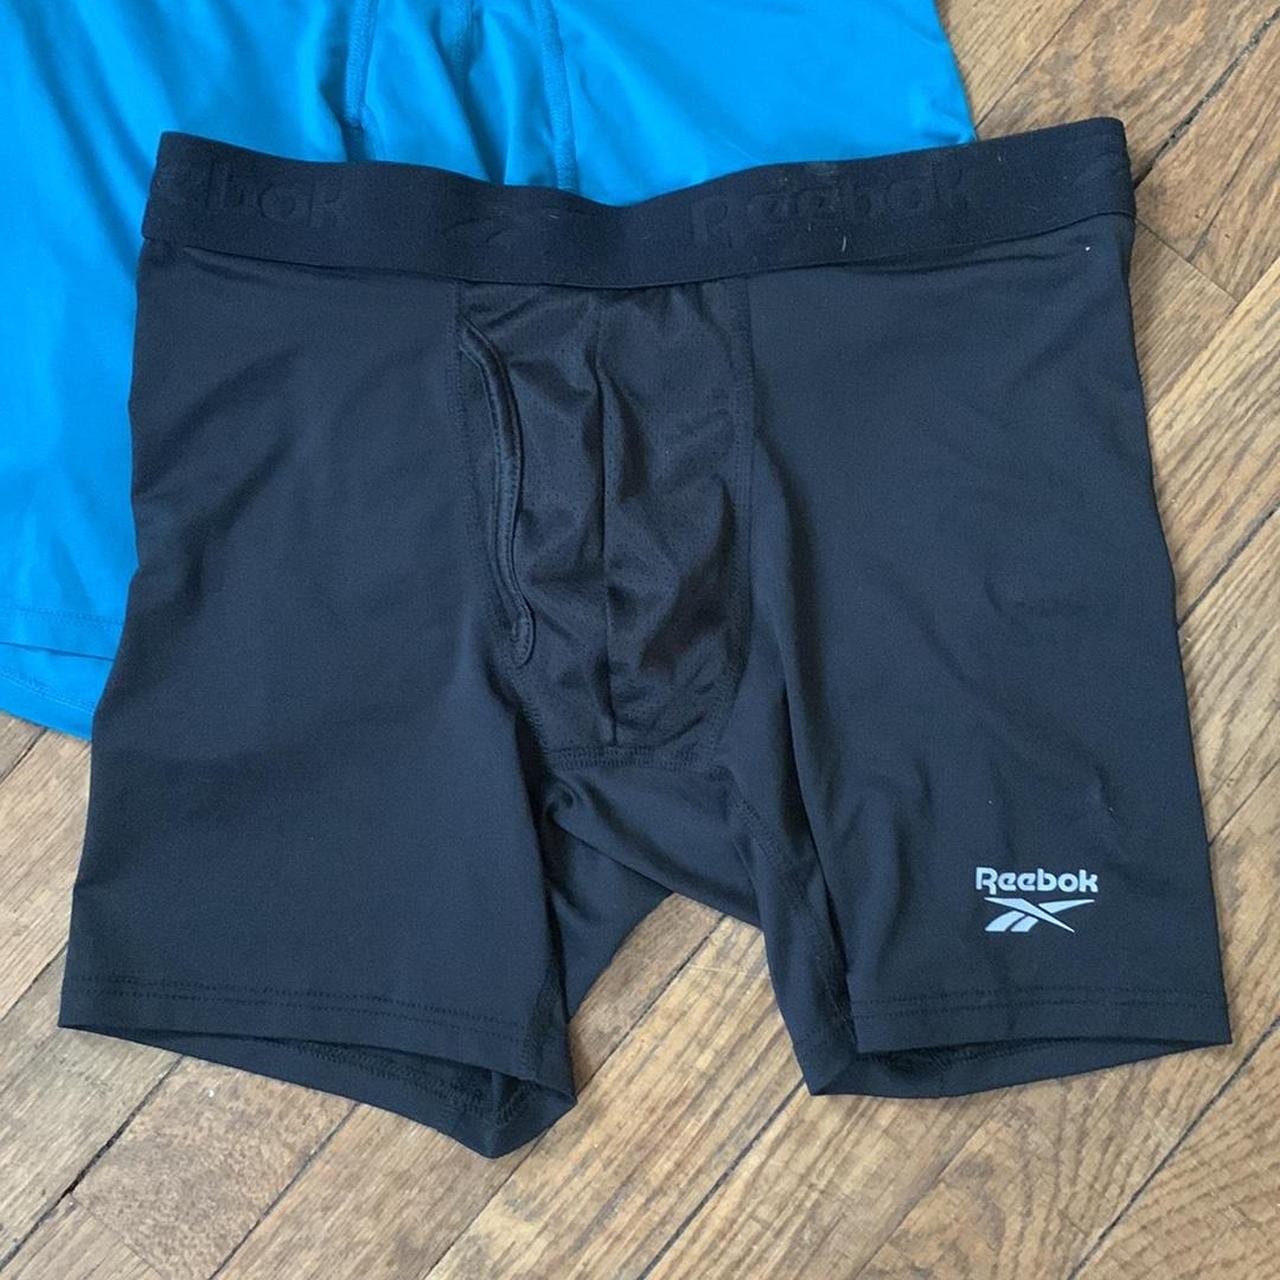 Adidas Men's Blue and Black Boxers-and-briefs (2)